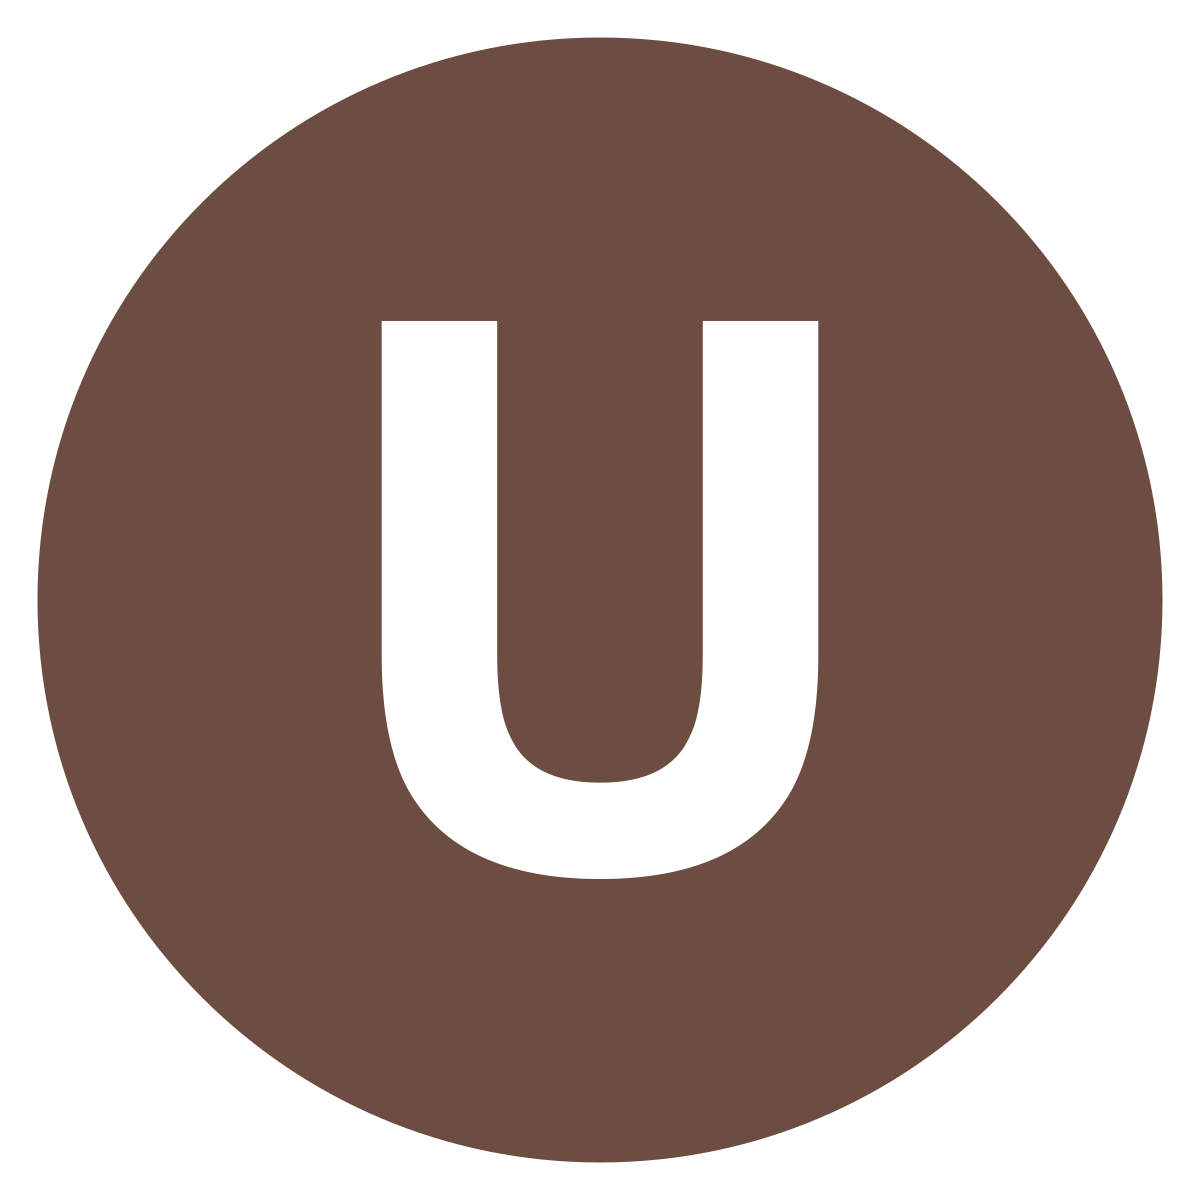 Download File:Eo circle brown letter-u.svg - Wikimedia Commons